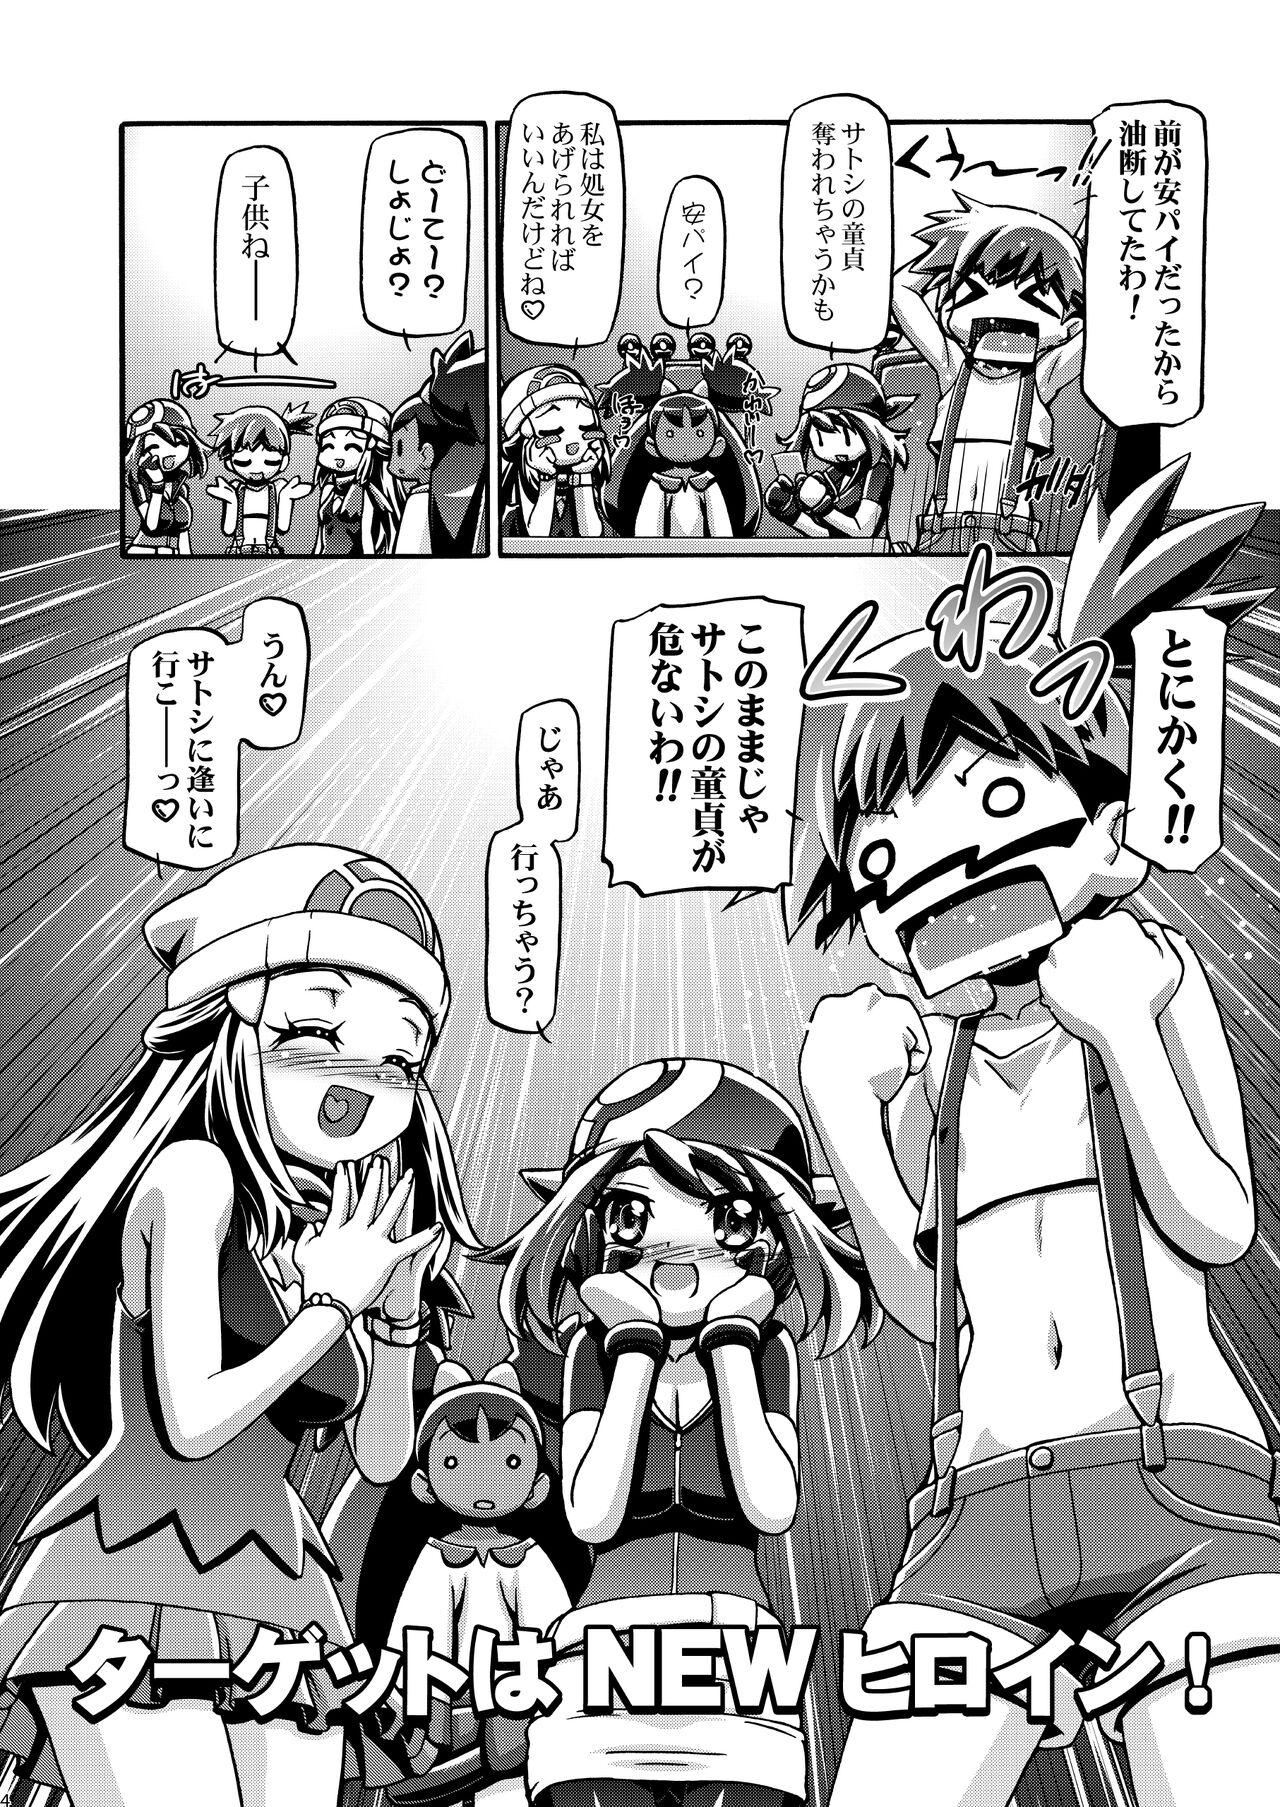 Free Amature PM GALS XY - Pokemon Behind - Page 3